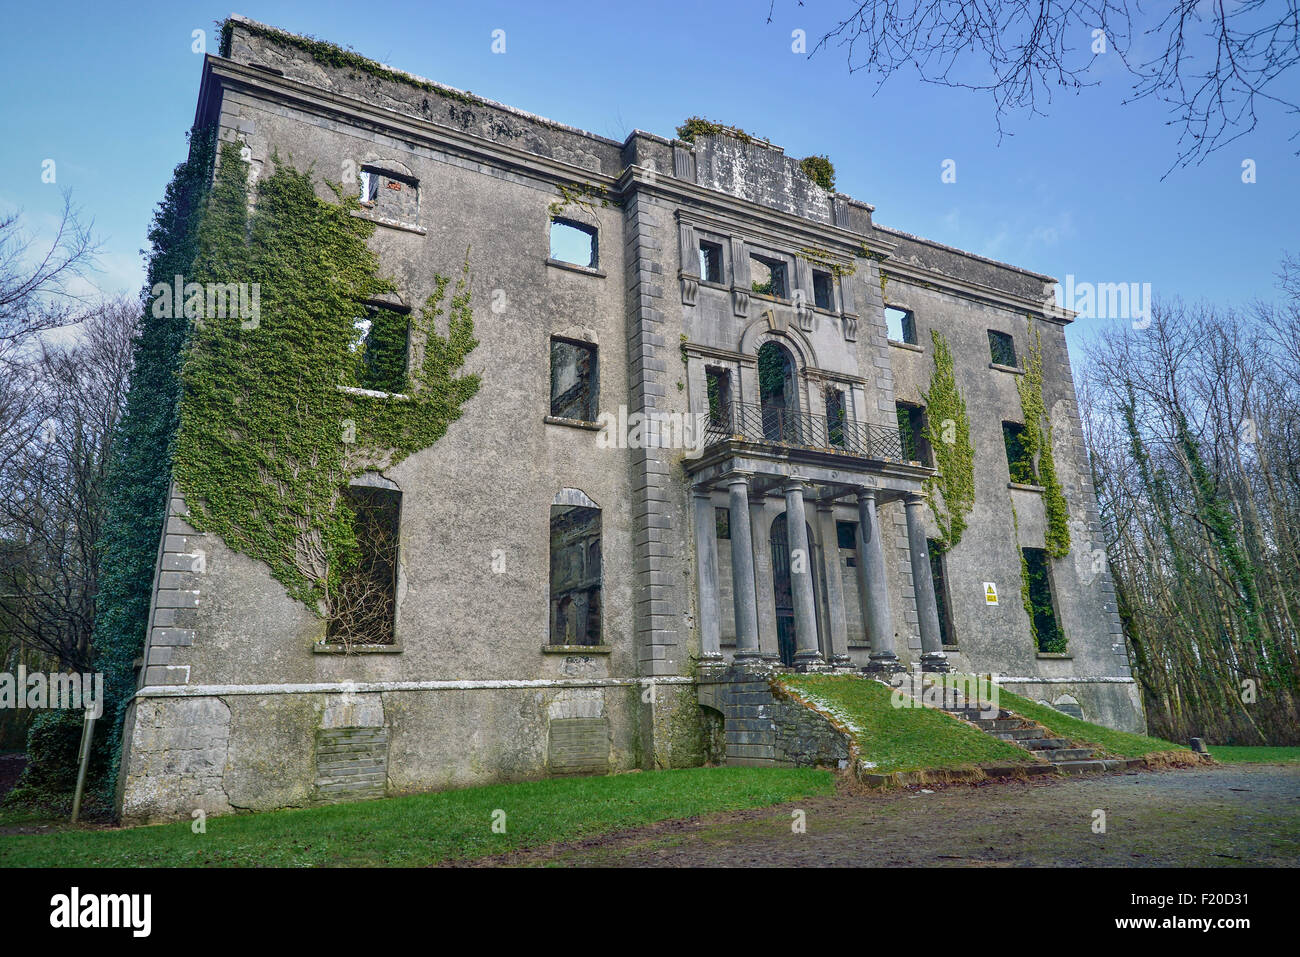 Ireland, County Mayo, Moore Hall, the ruins of the former Moore family home on the shores of Lough Carra. Stock Photo